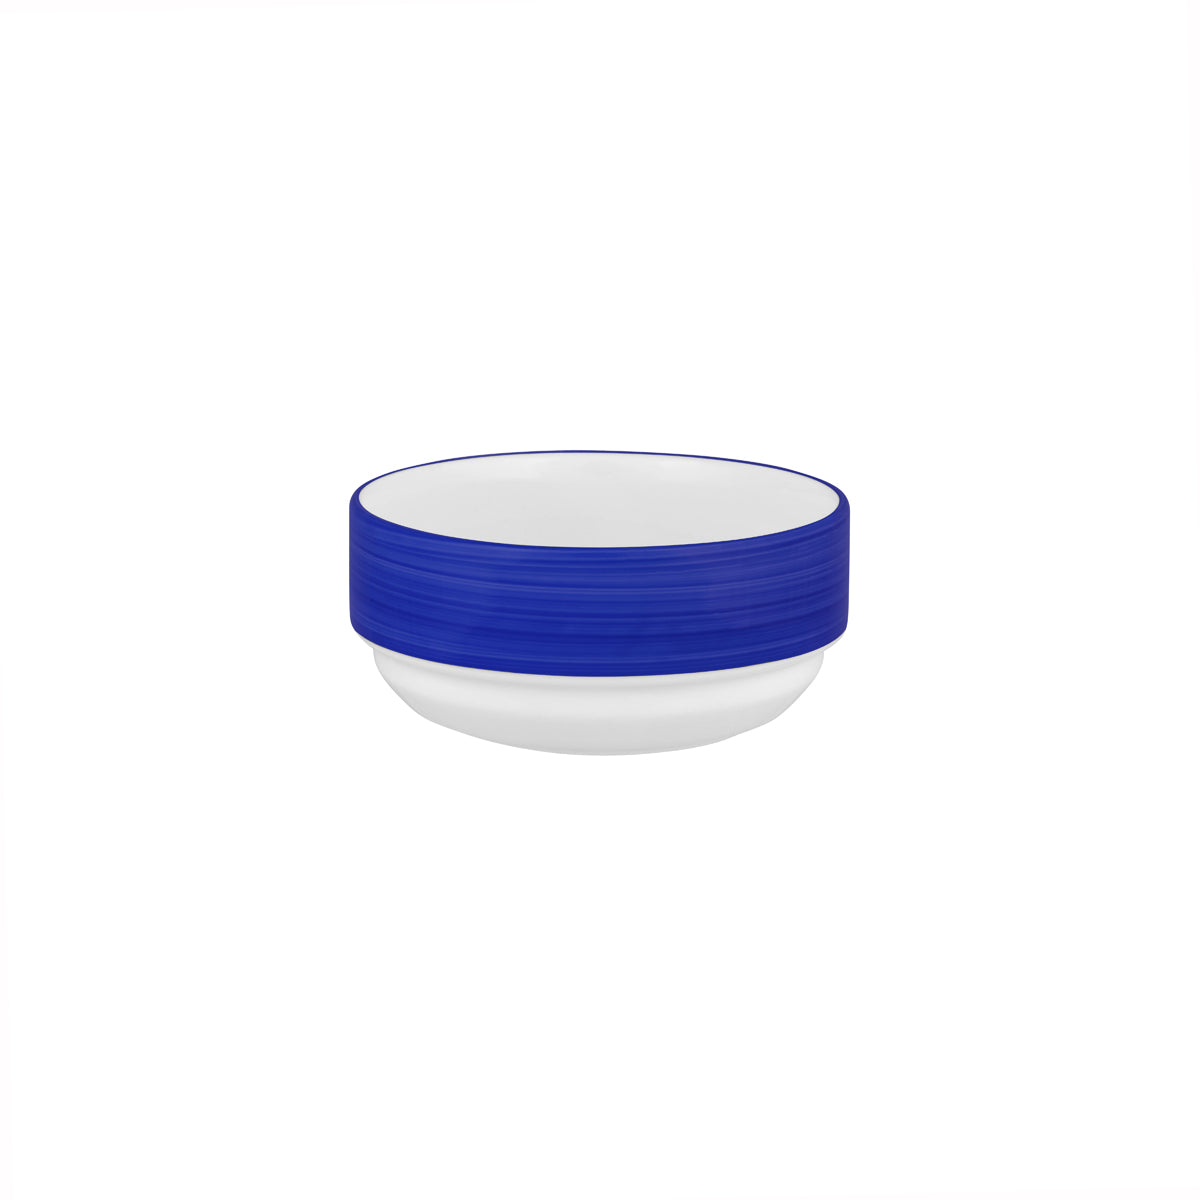 Stocked Studio Stack Soup Bowl 113mm Leschenaultia Dark Blue: Pack of 12